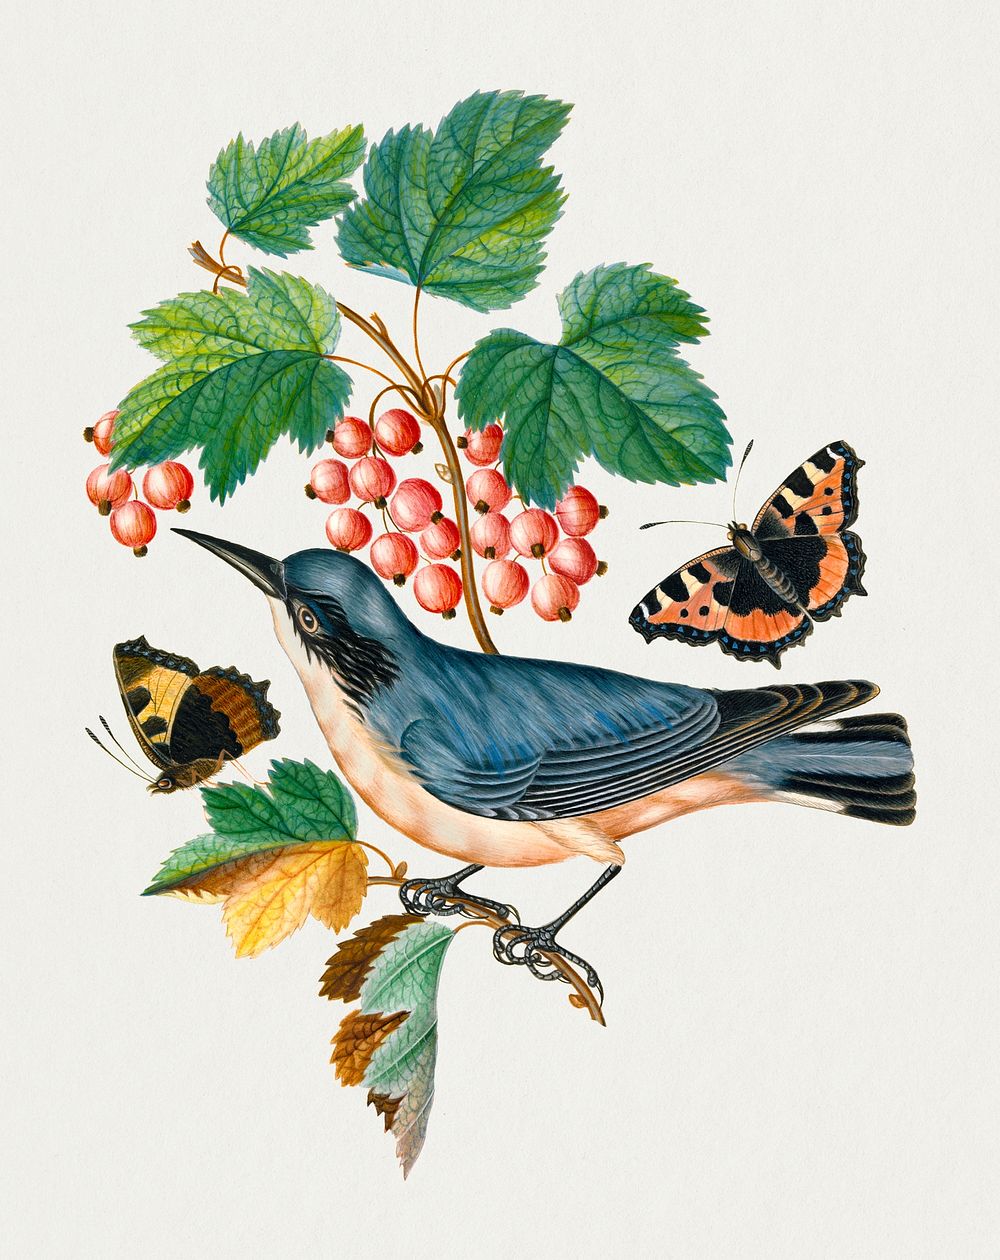 Bird, butterfly, strawberry plant sticker, vintage illustration psd, remixed from artworks by James Bolton